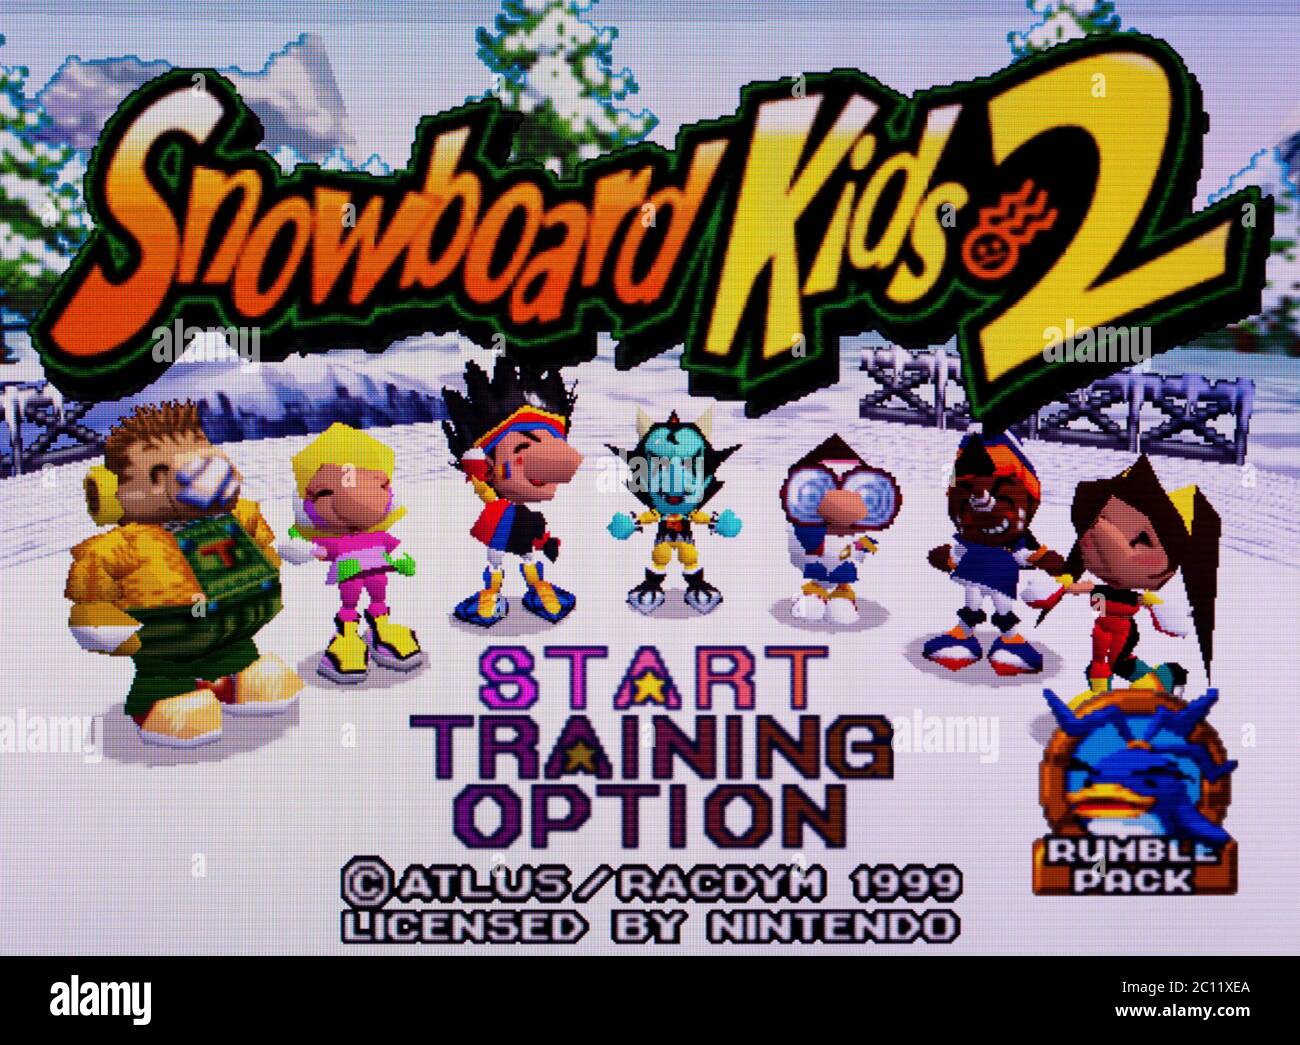 Snowboard Kids 2 - Nintendo 64 Videogame - Editorial use only Stock Photo -  Alamy